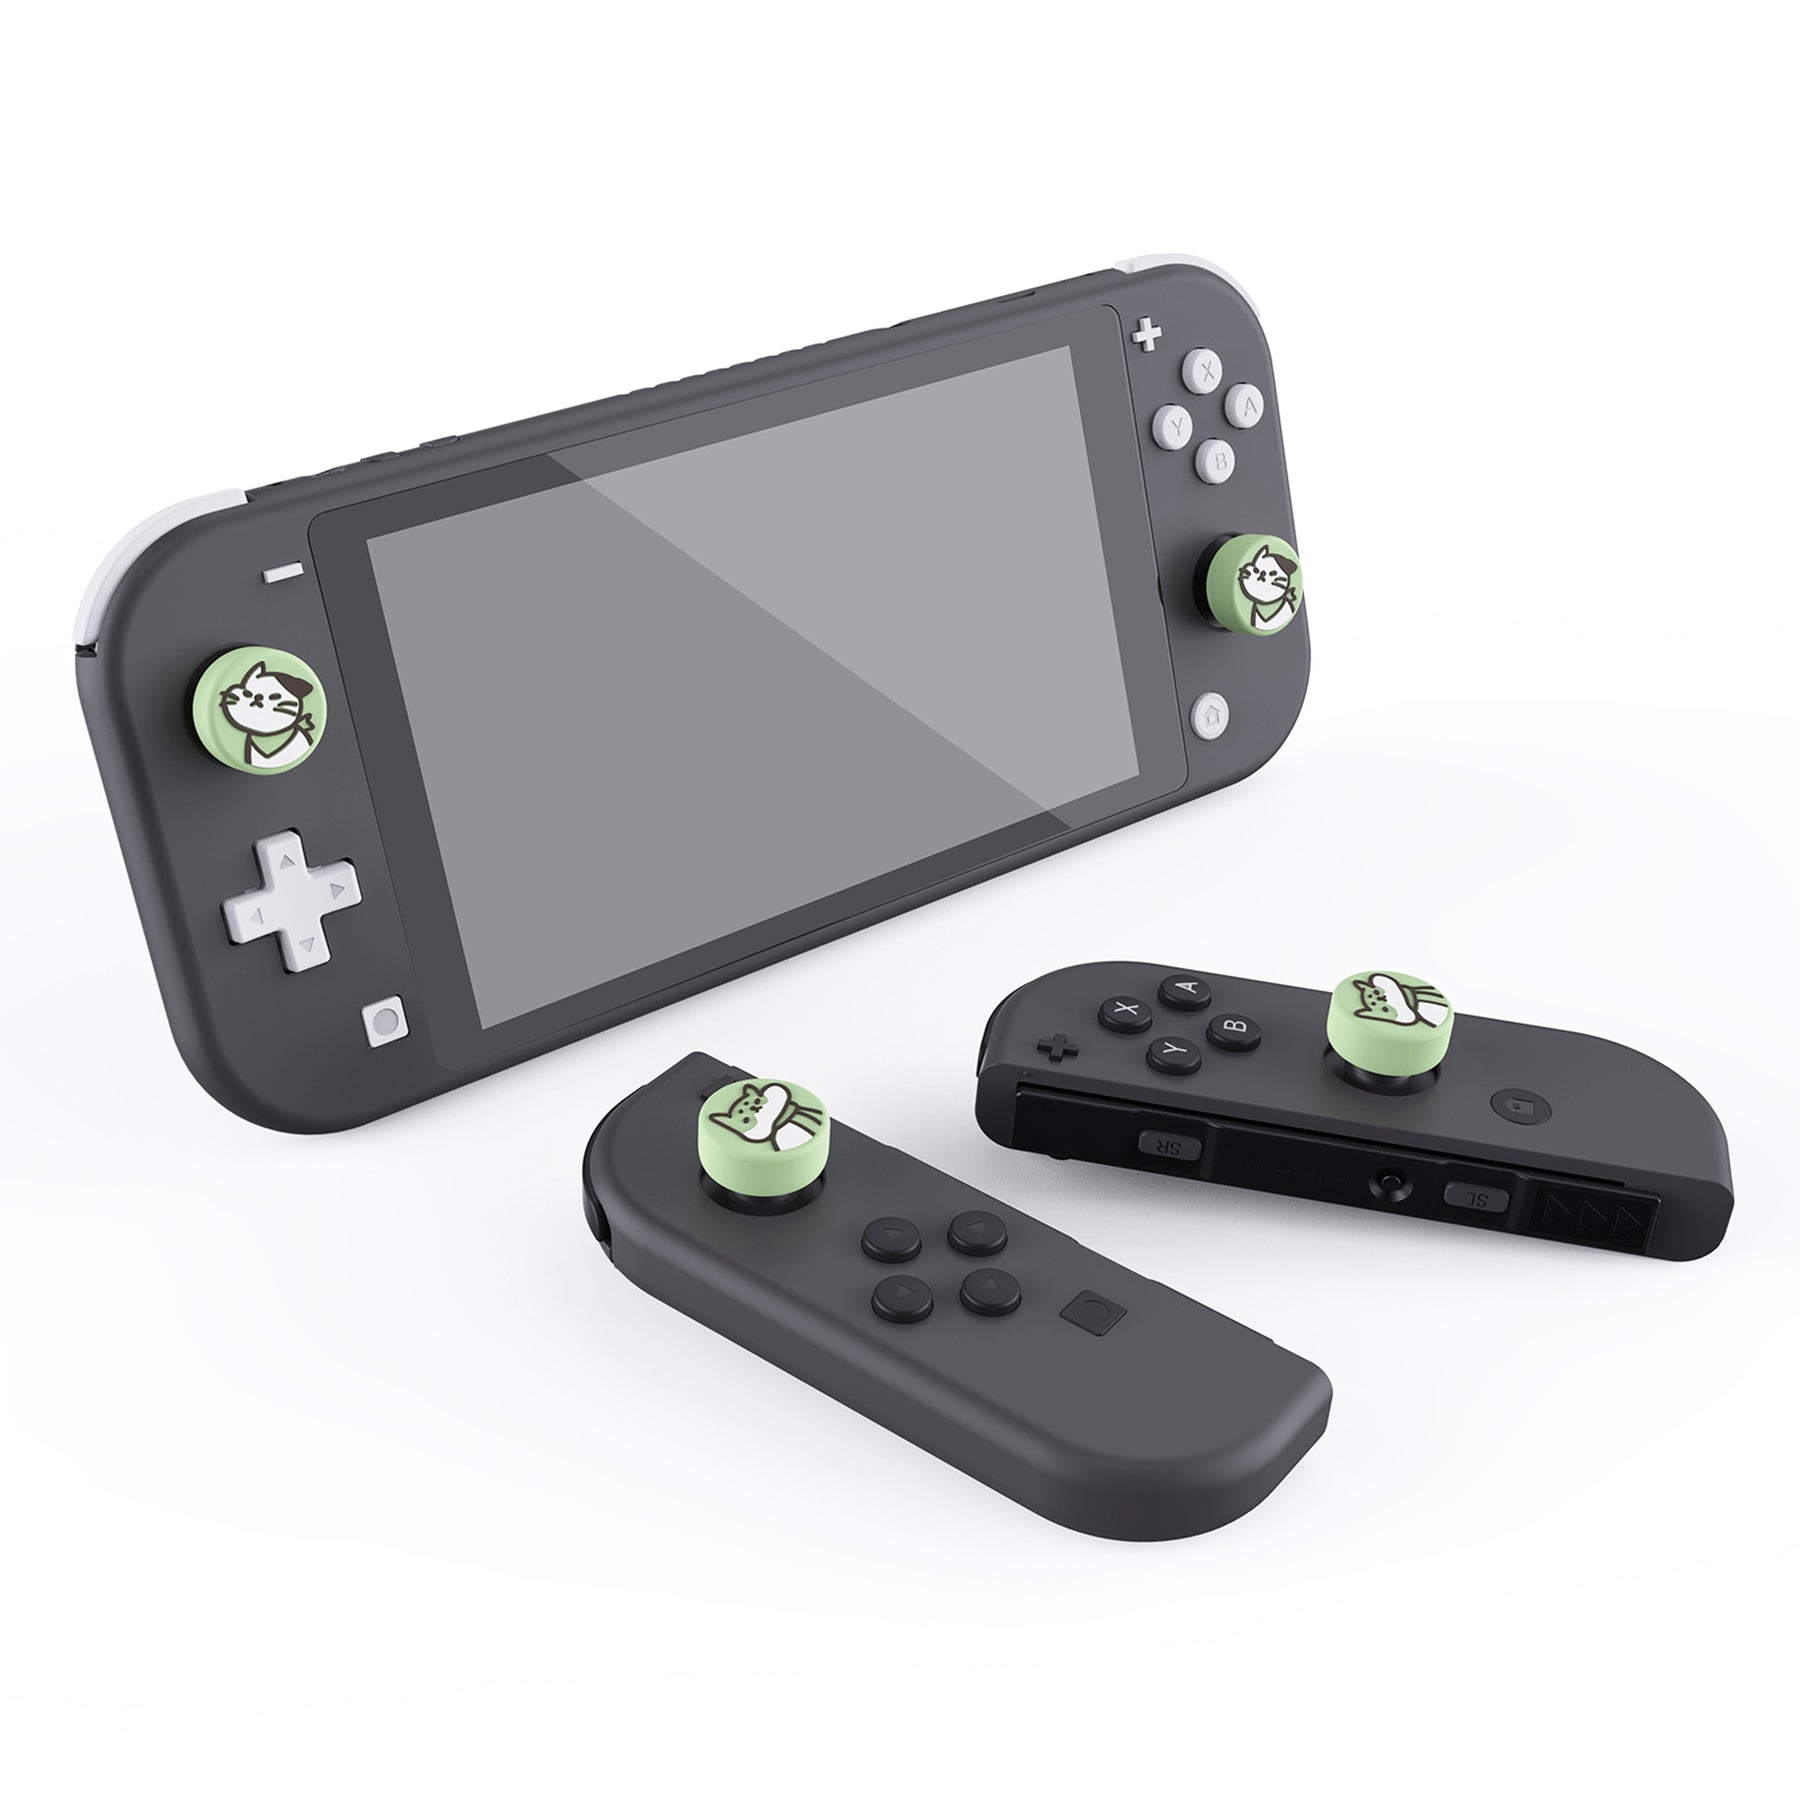 PlayVital Kitten & Doggie Cute Switch Thumb Grip Caps, Joystick Caps for Nintendo Switch Lite, Silicone Analog Cover Thumbstick Grips for Switch OLED Joycon - Matcha Green - NJM1116 playvital